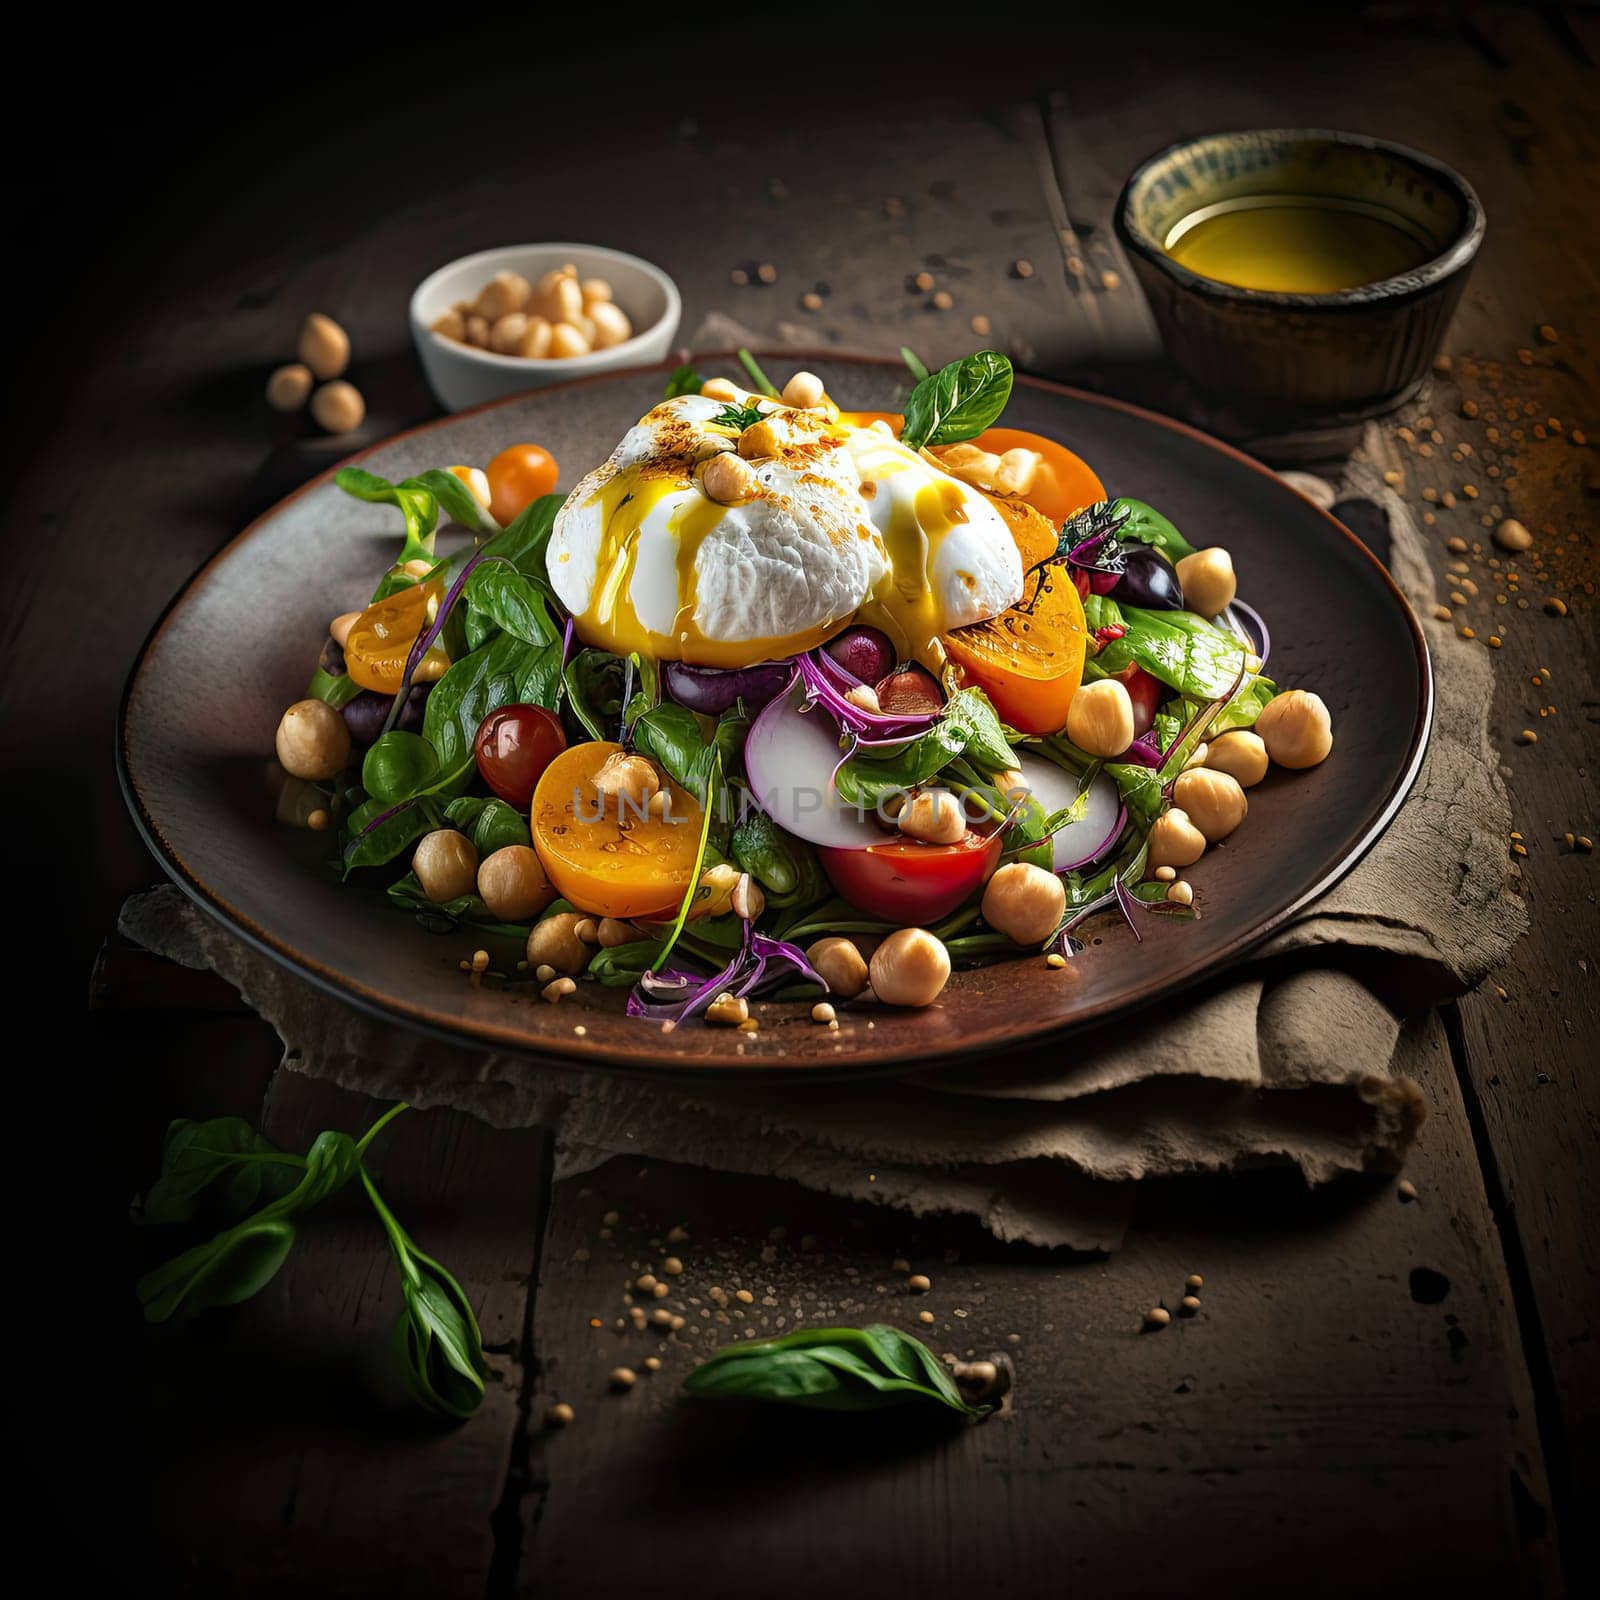 Healthy and tasty salad with fresh vegetables, chickpeas and poached egg.